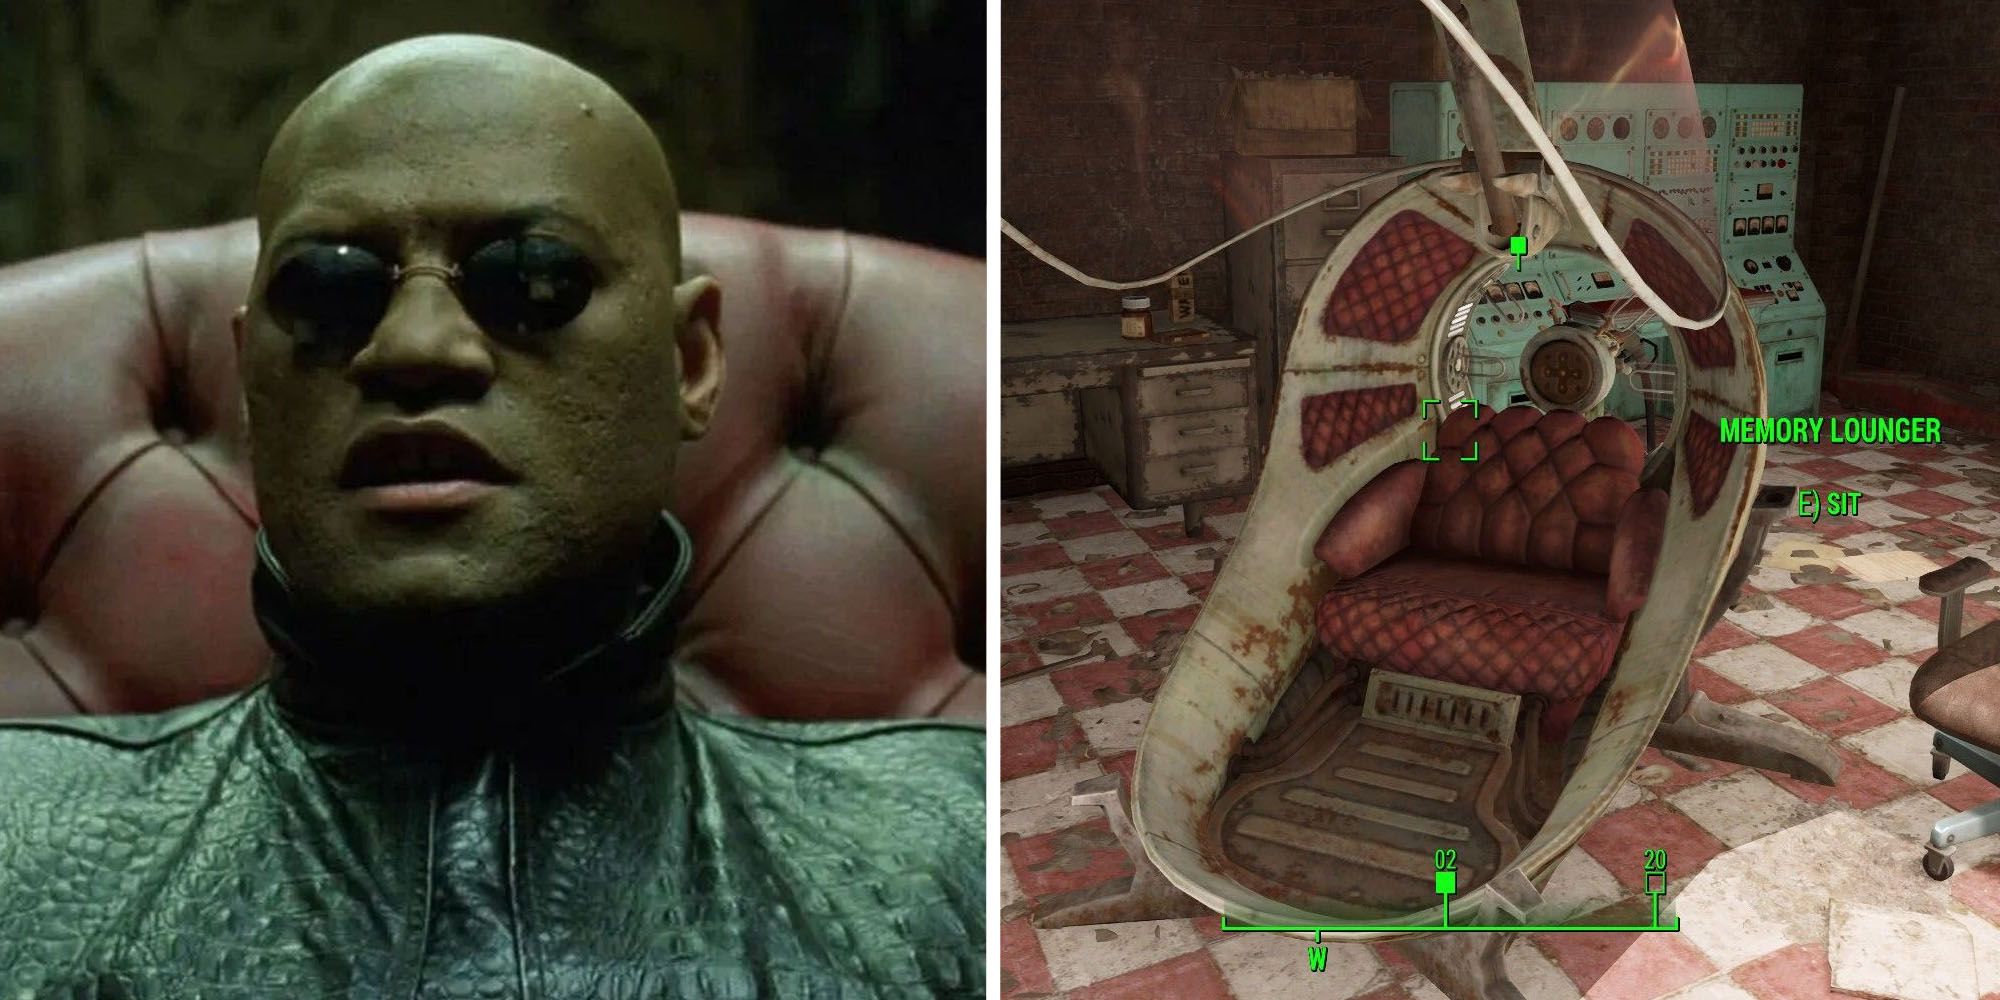 The Matrix Morpheus and the Memory Lounger in Fallout 4